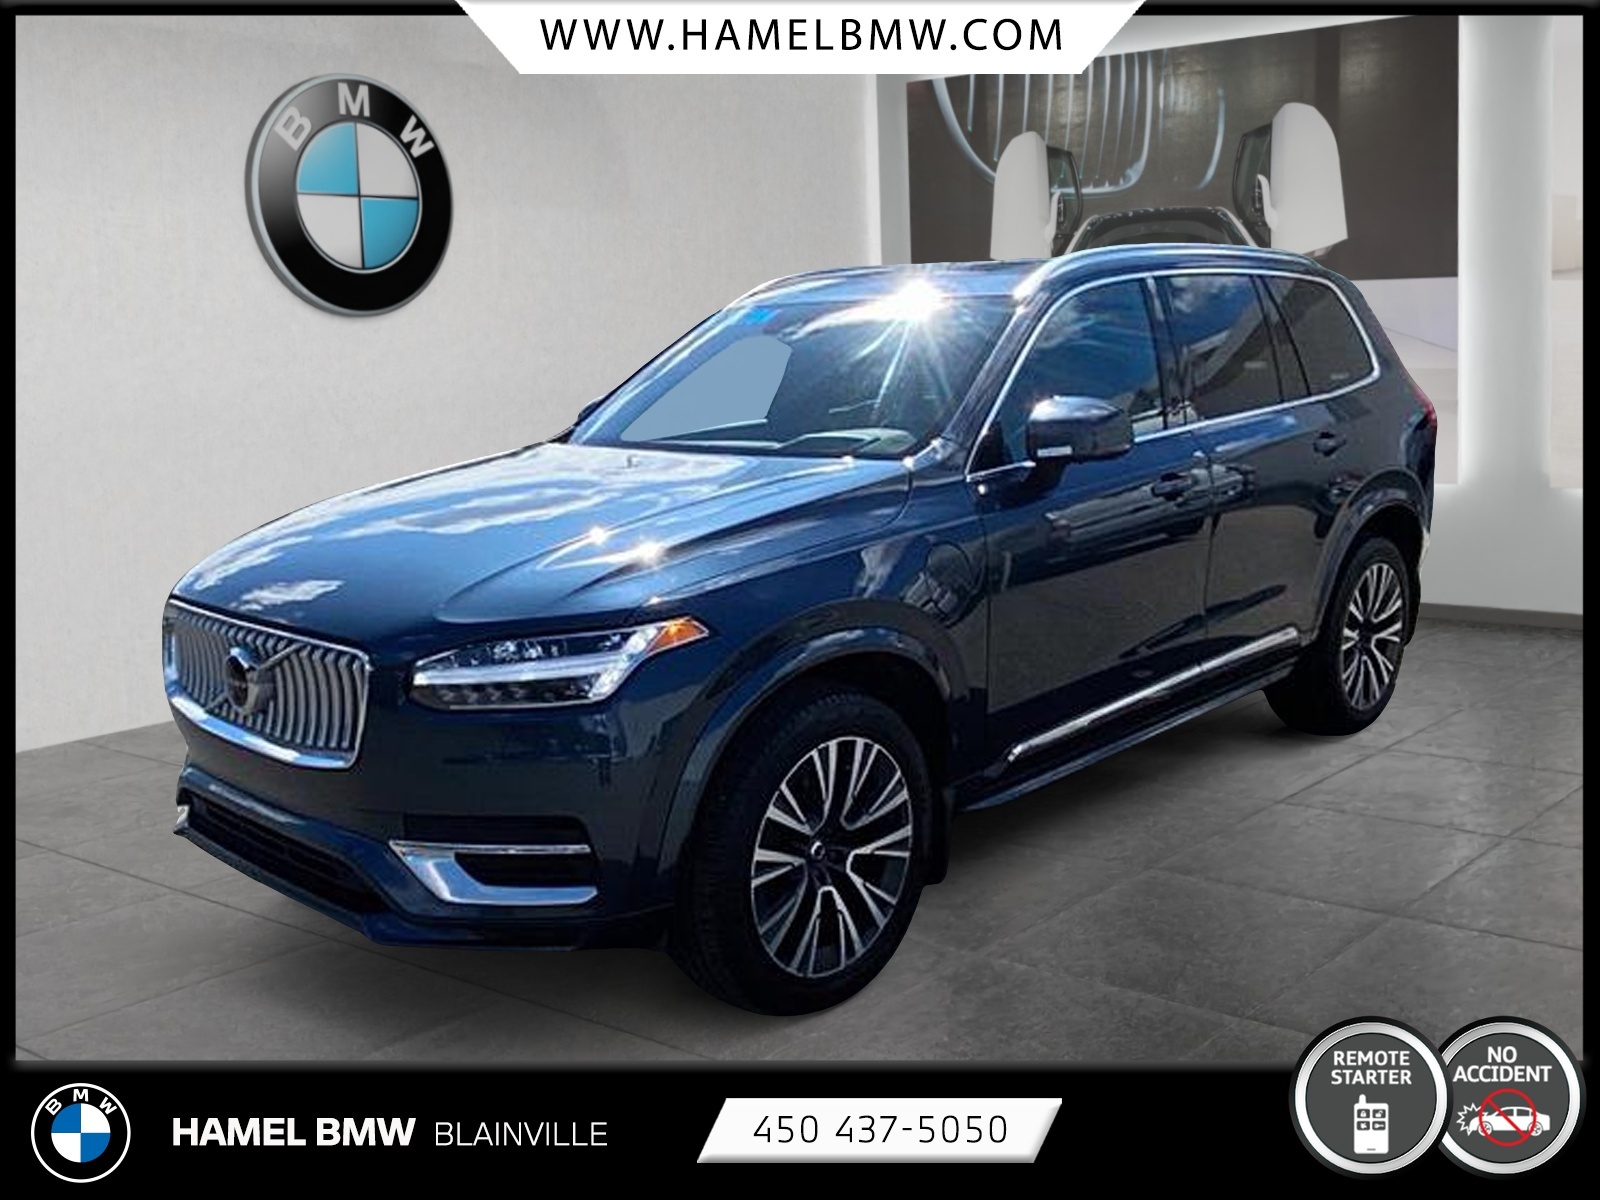 2021 Volvo XC90 Recharge T8 Inscription Expression hybride recharg